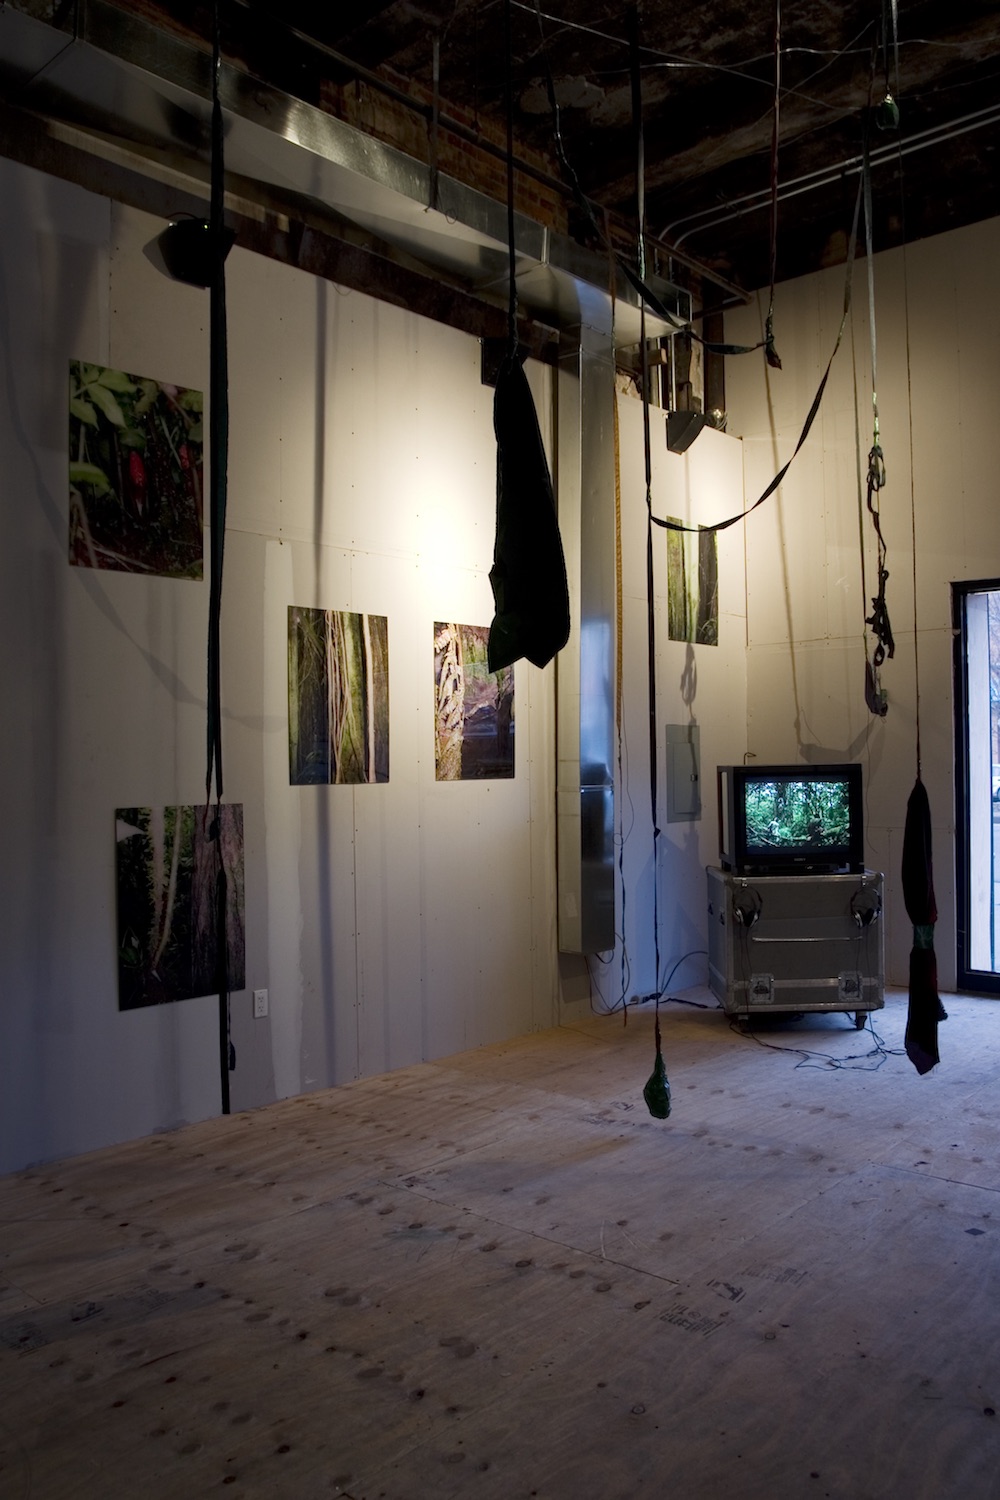 Frans and Frederik Jacobi, *THE SOUND OF TWO PLANTS FIGHTING FOR LIFE,* 2008. 16mm on DVD 16:16 minutes, photos and installation